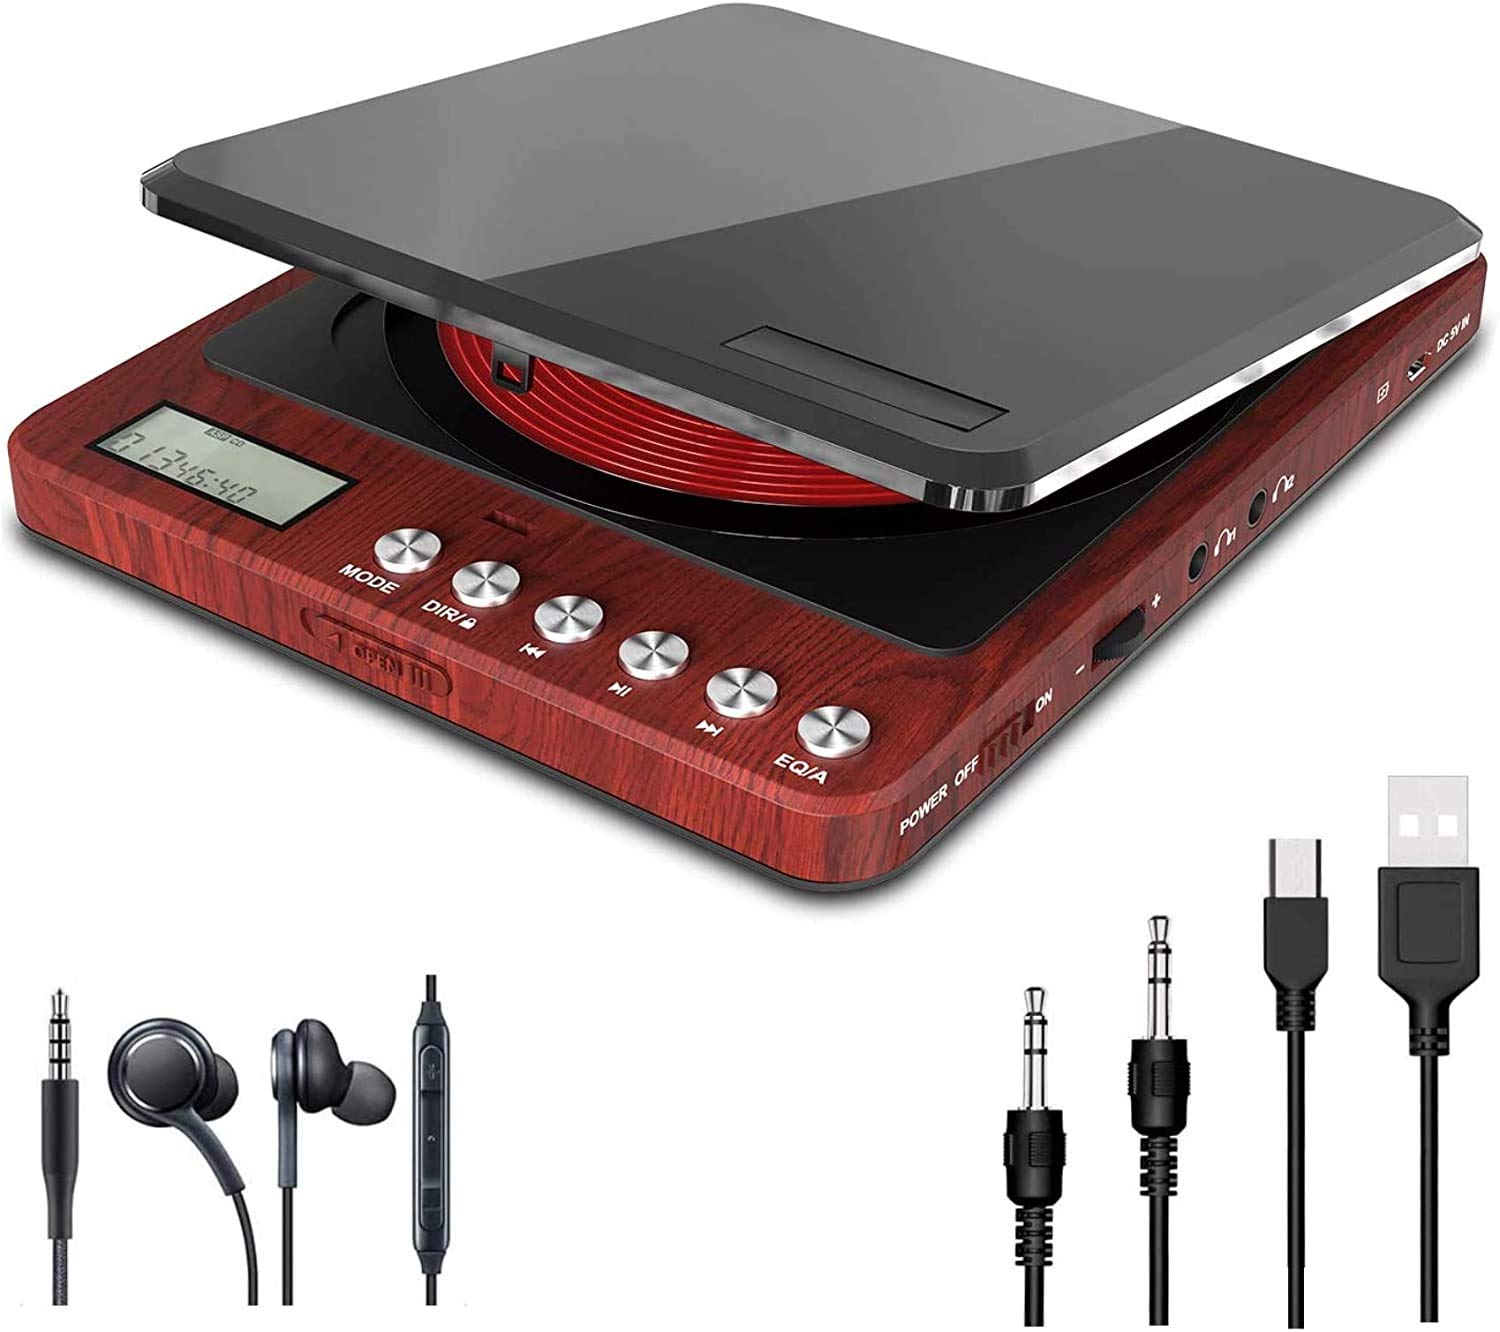 Retro Portable CD Player with Speaker, Built-in 2500mAh Lithium Battery, Personal Rechargeable MP3 CD Player with 3.5mm AUX Cable for Home Travel or Car,Anti-Skip/Shockproof Function - Red